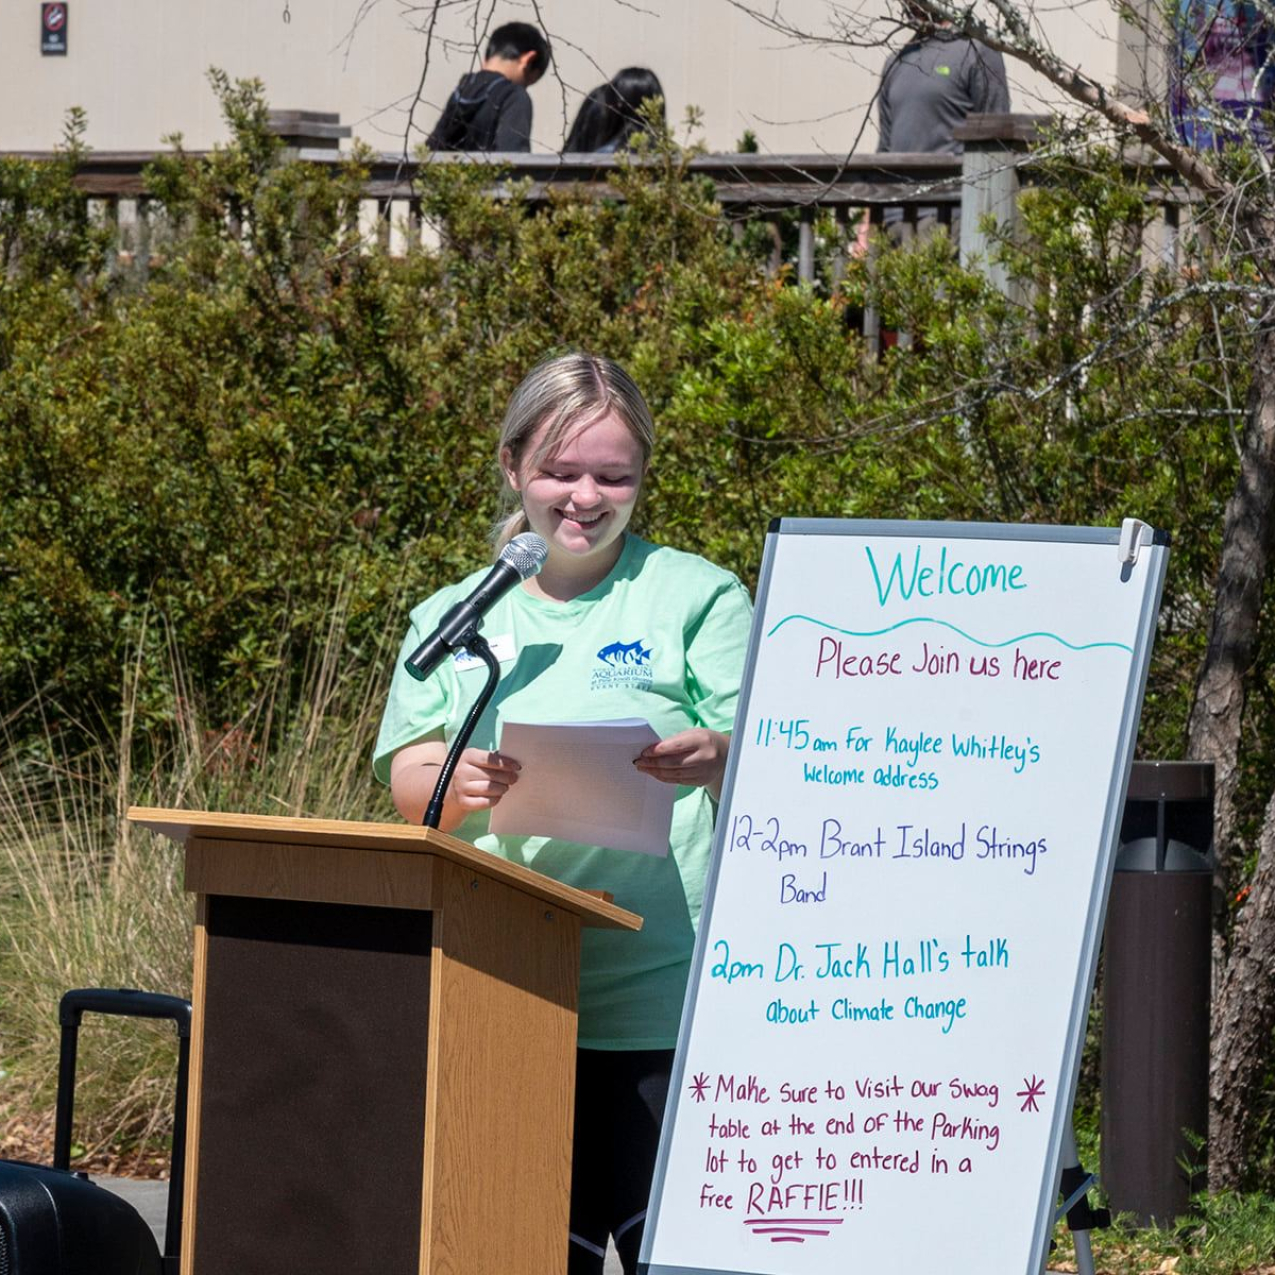 A person stands behind a podium with a microphone outside while holding and looking at papers in her hand. A white board is set up next to her that reads “Welcome please join us here” and lists a schedule of the event. In the background, there are trees and bushes and a few people standing on a wooden deck. 